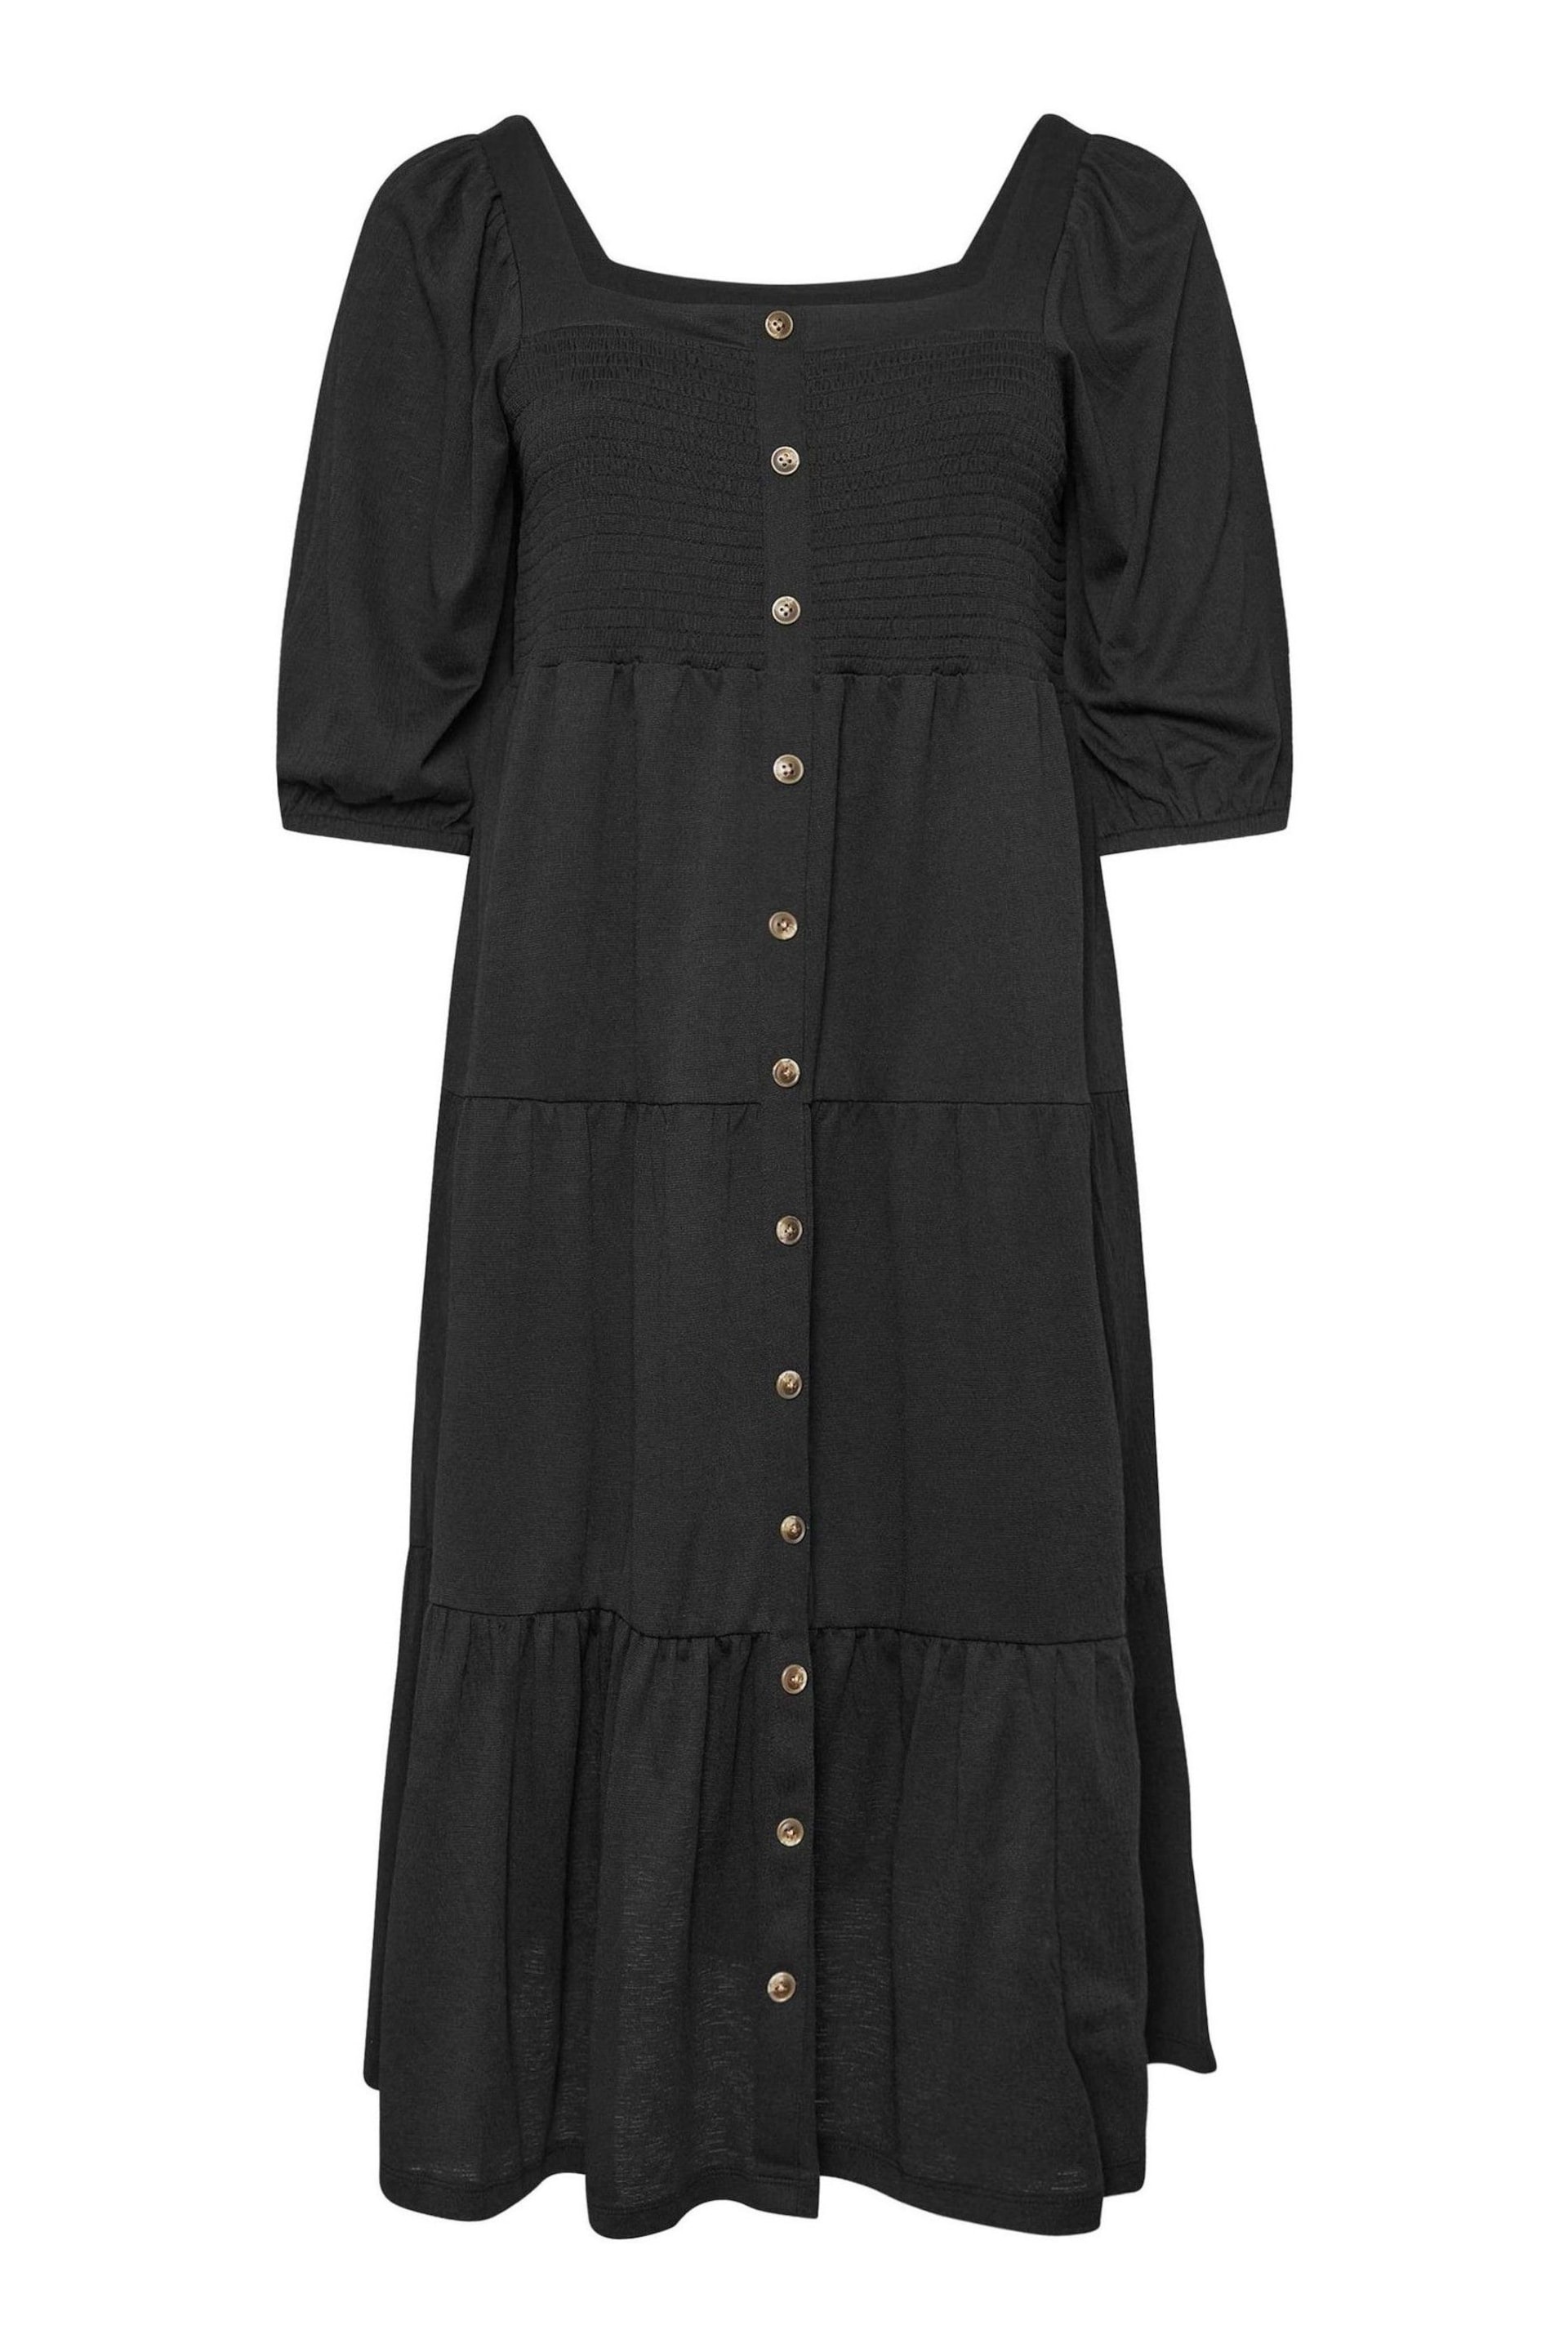 Yours Curve Black Button Front Tiered Midi Dress - Image 5 of 5